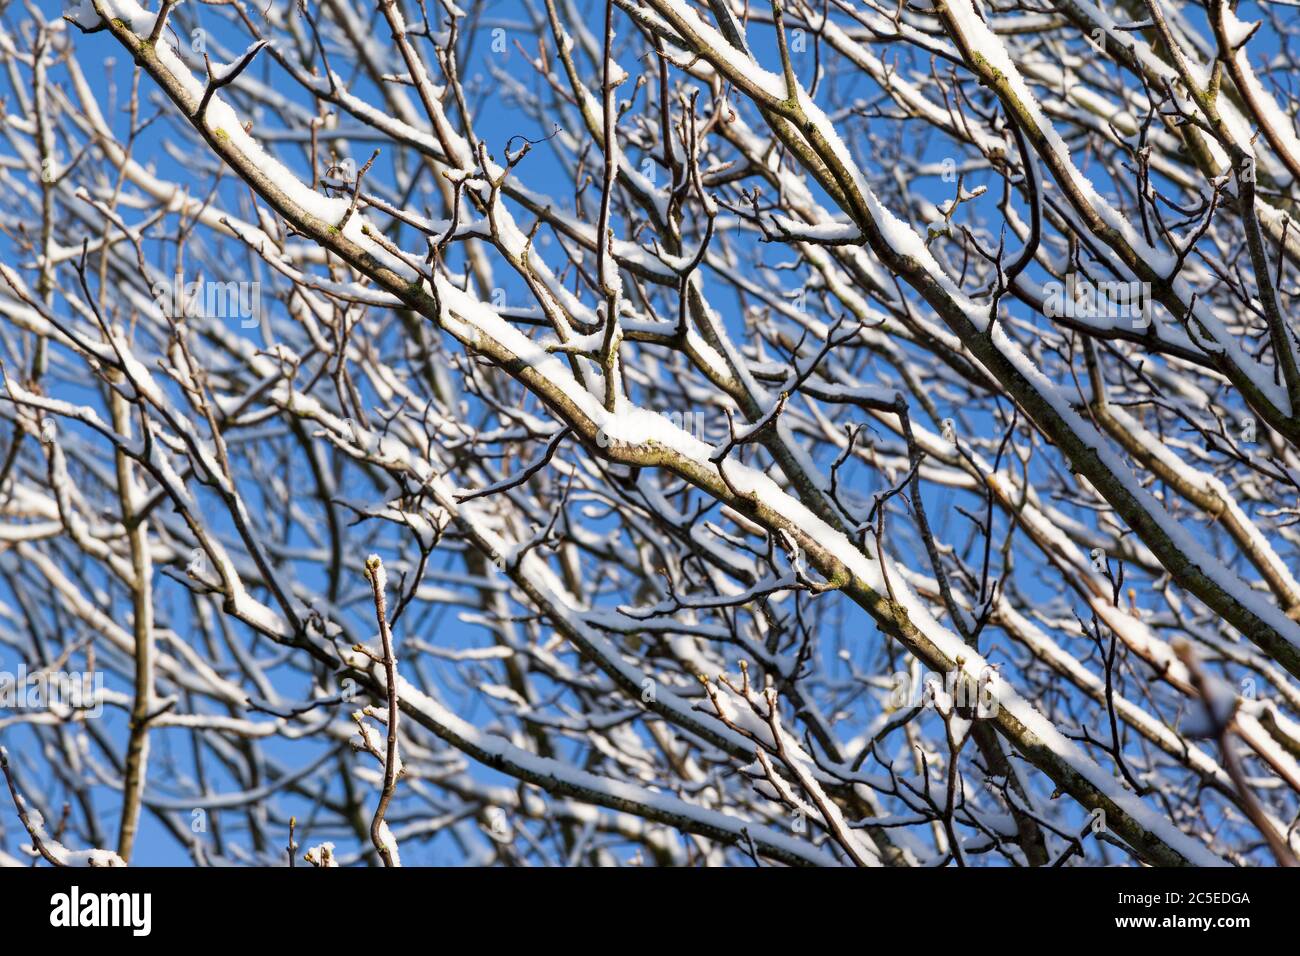 Close-up of tree branches covered in snow with a blue sky background. Selective focus on foreground branches. Stock Photo